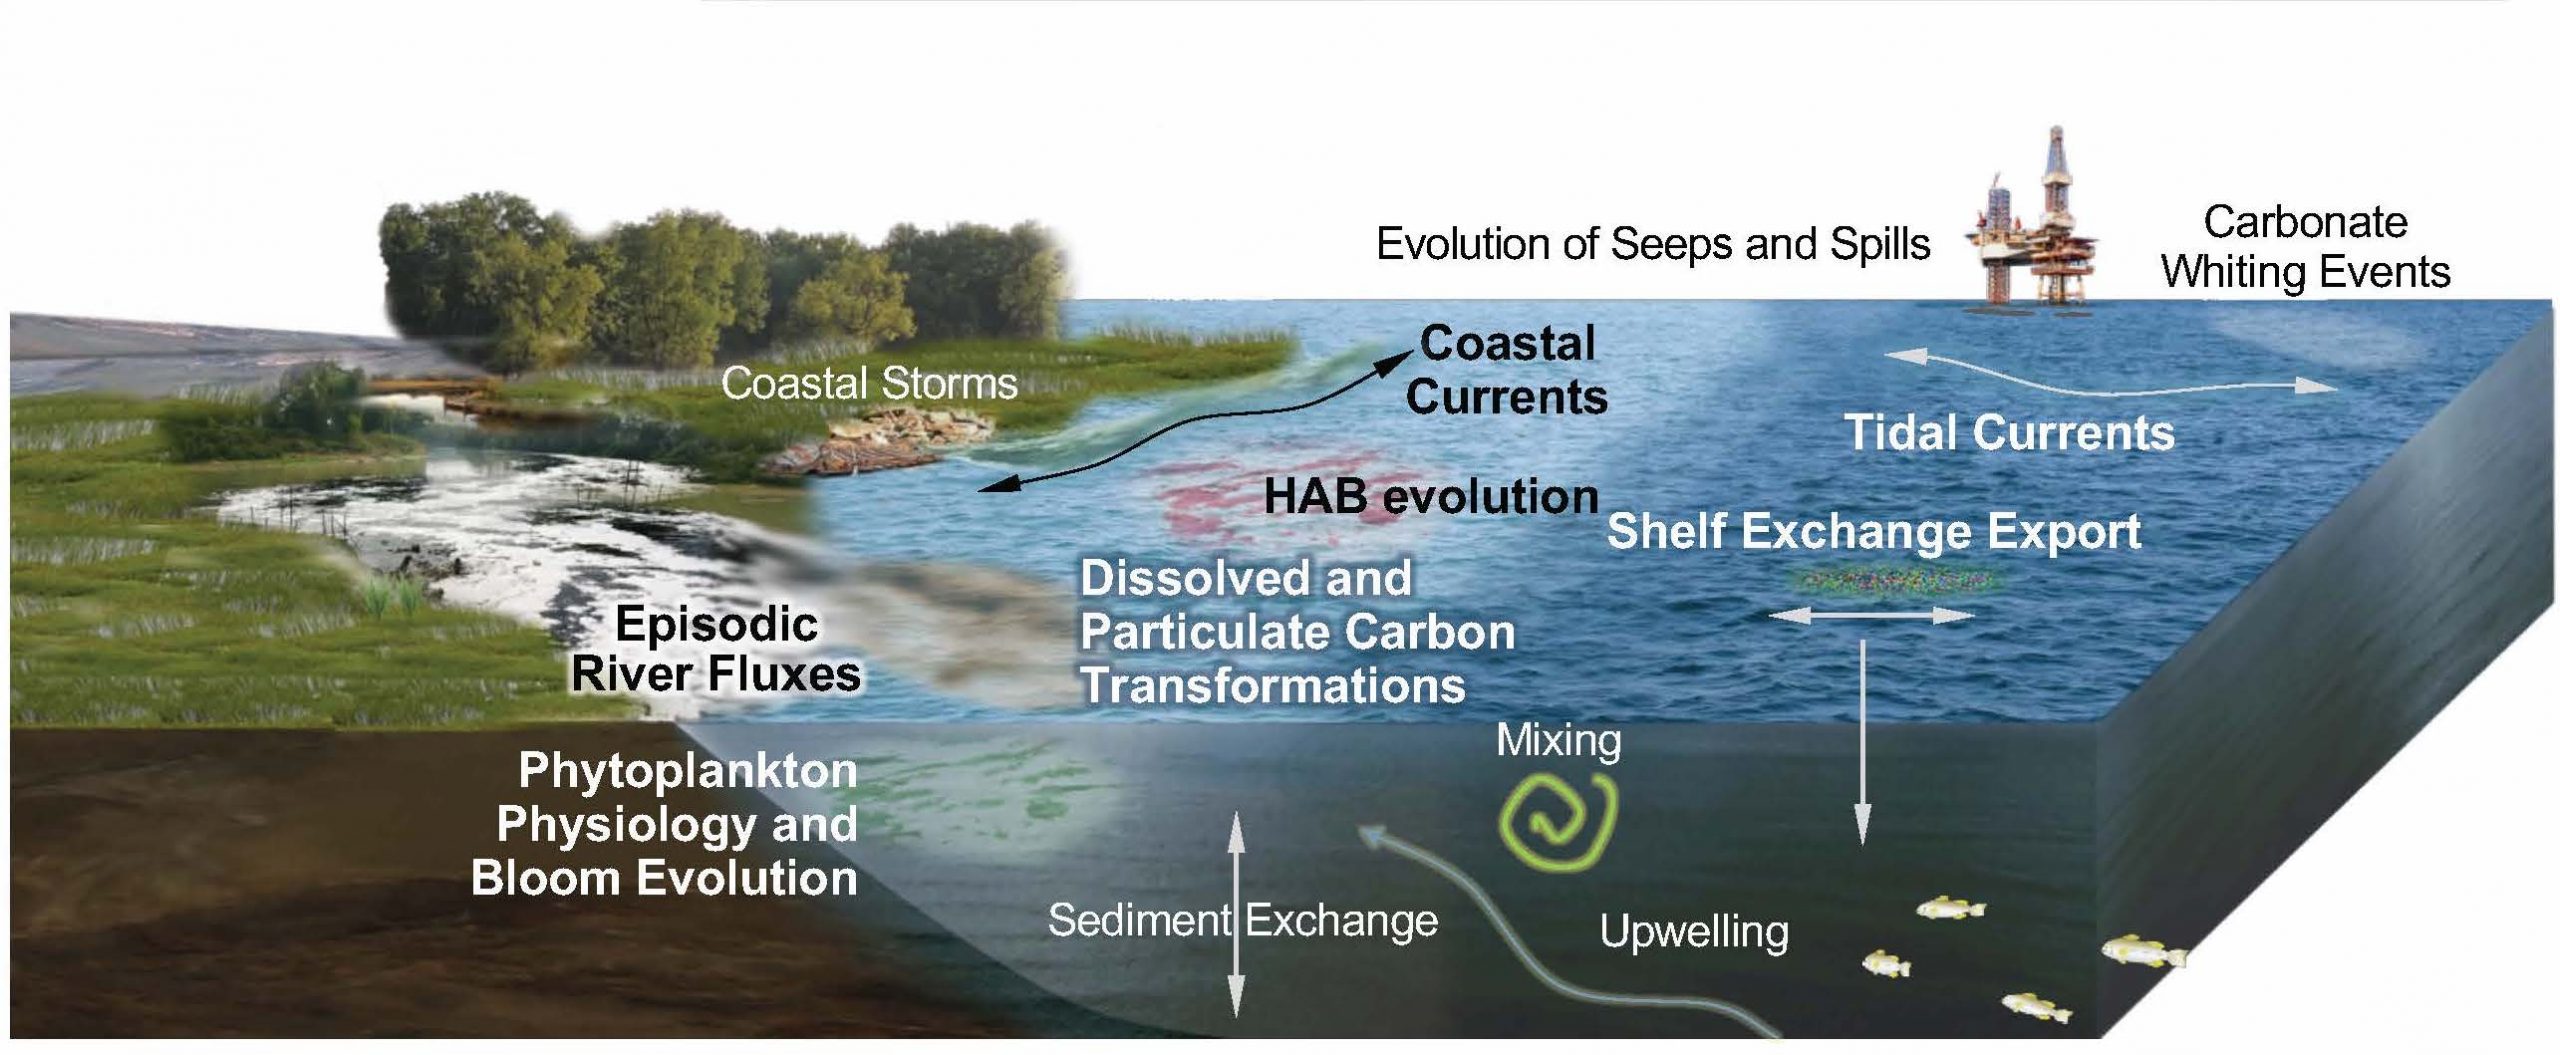 Coastal ecosystem dynamics in the Gulf of Mexico (https://eos.unh.edu/glimr/about)